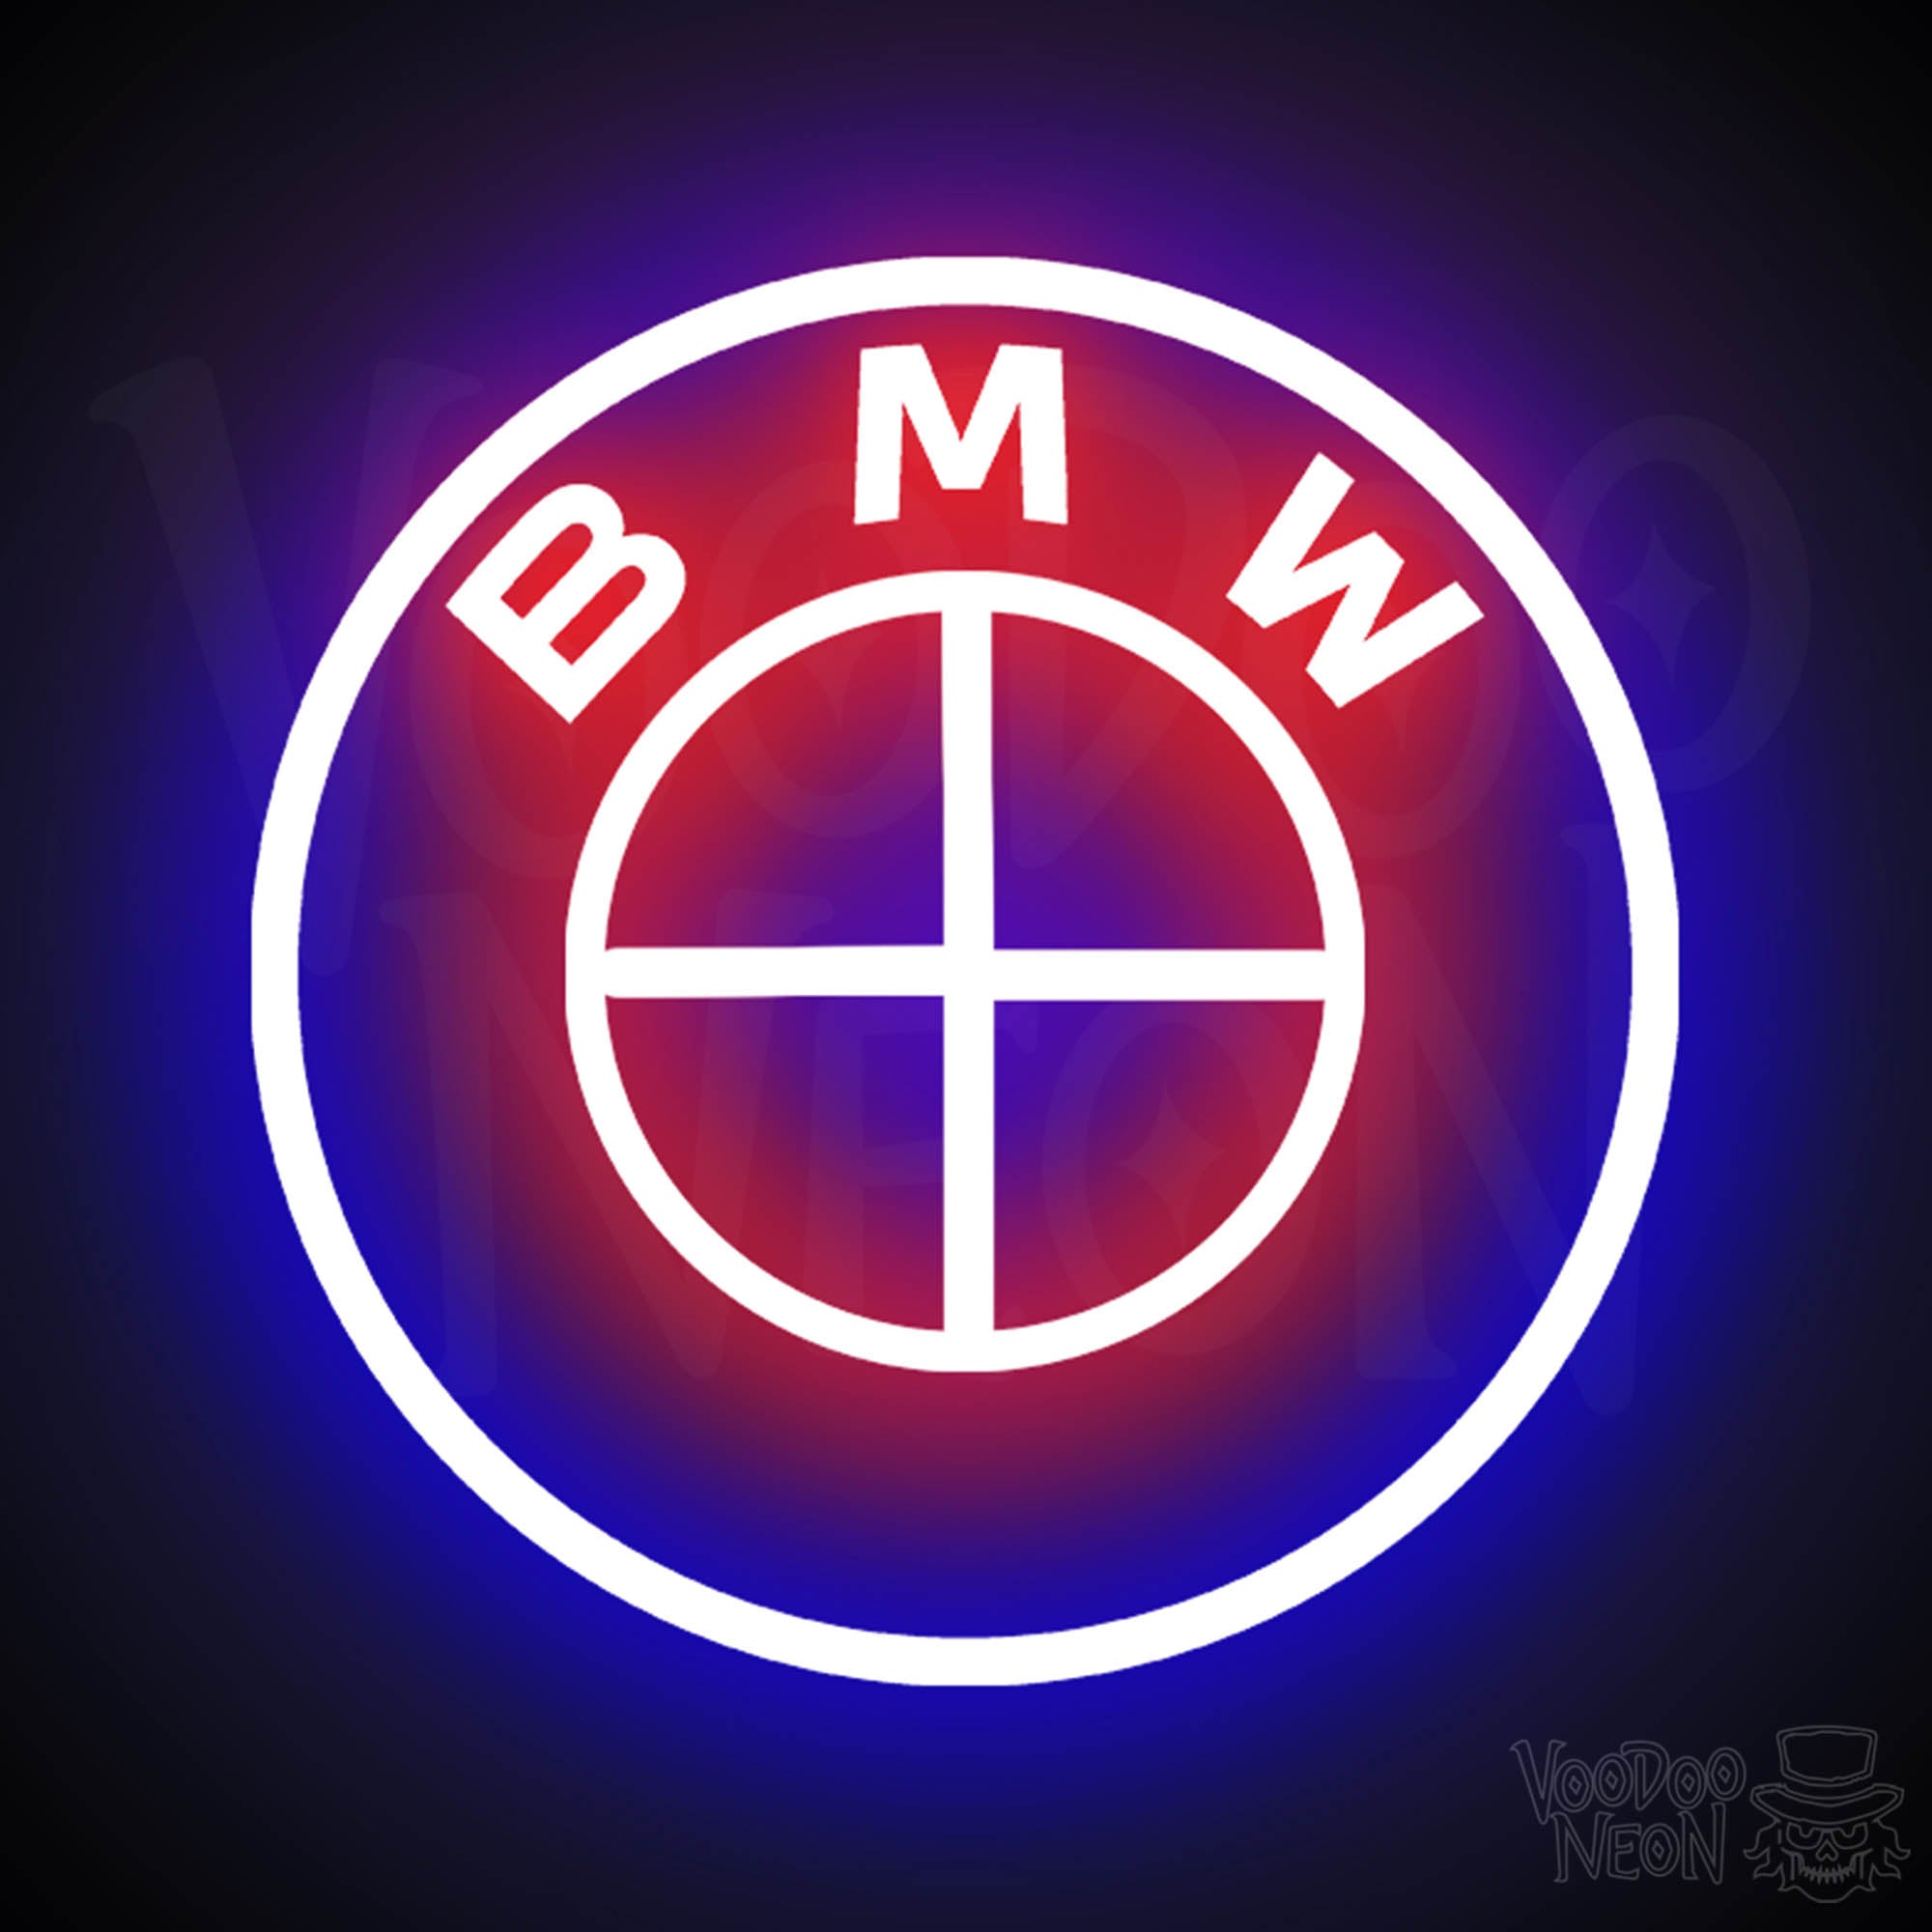 Neon LED BMW logo two-color